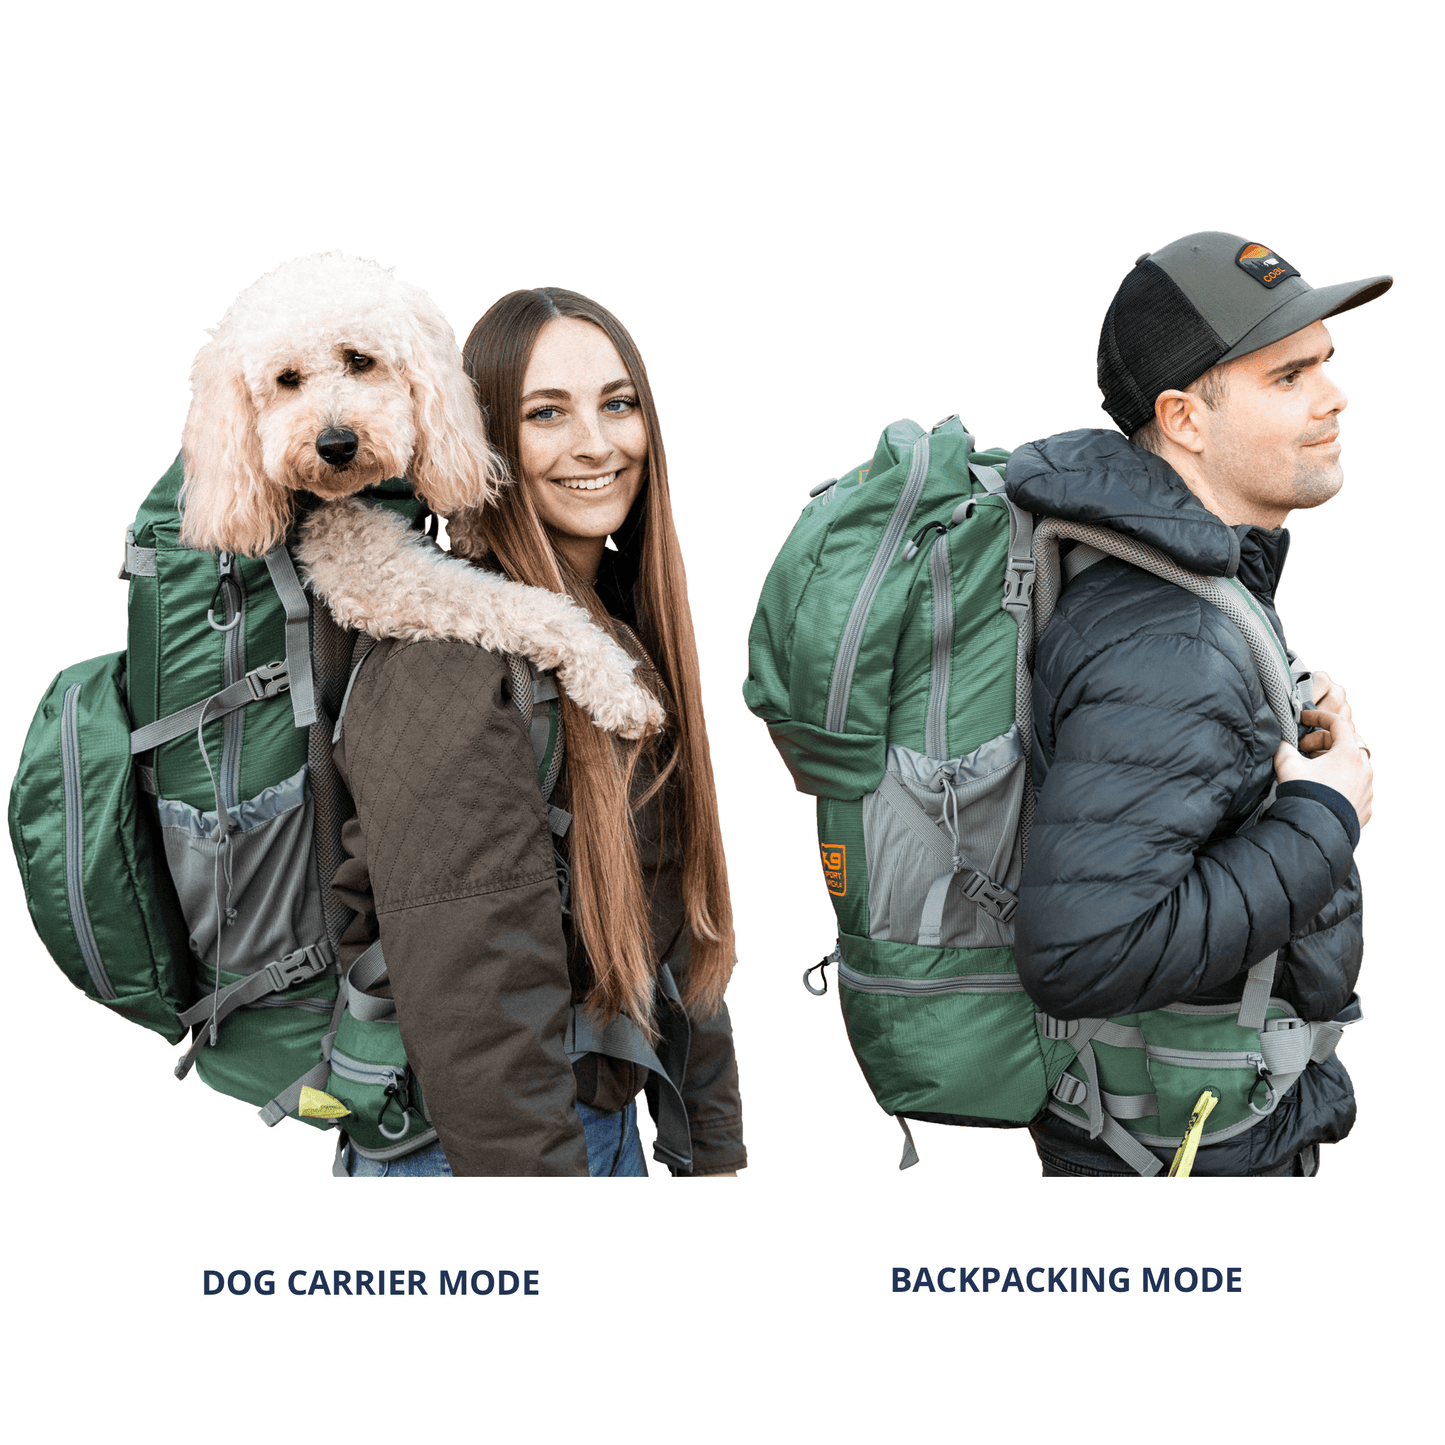 K9 Sport Sack - KOLOSSUS | Big Dog Carrier & Backpacking Pack - Large (20"-23" from collar to tail) / Black